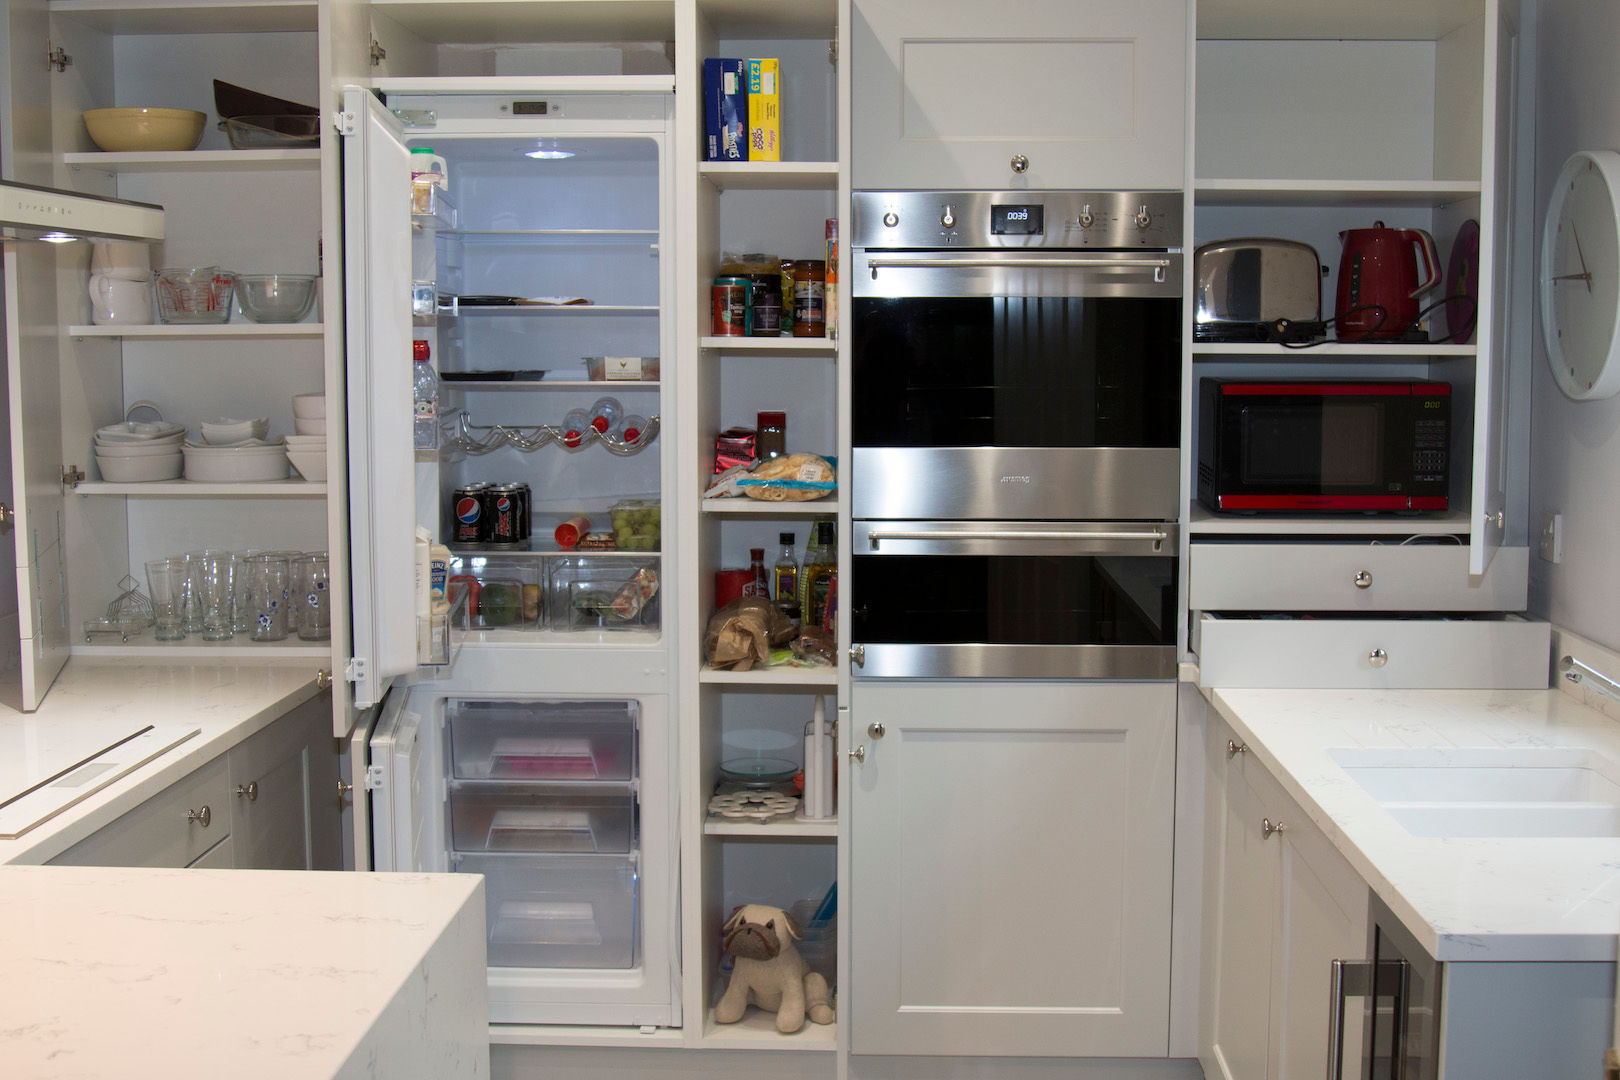 It's amazing how much storage you can have with an Appliance Wall homify 클래식스타일 주방 우드 우드 그레인 grey kitchen,grey cupboards,appliance wall,kitchen storage,classic kitchen,contemporary kitchen,grey doors,SMEG